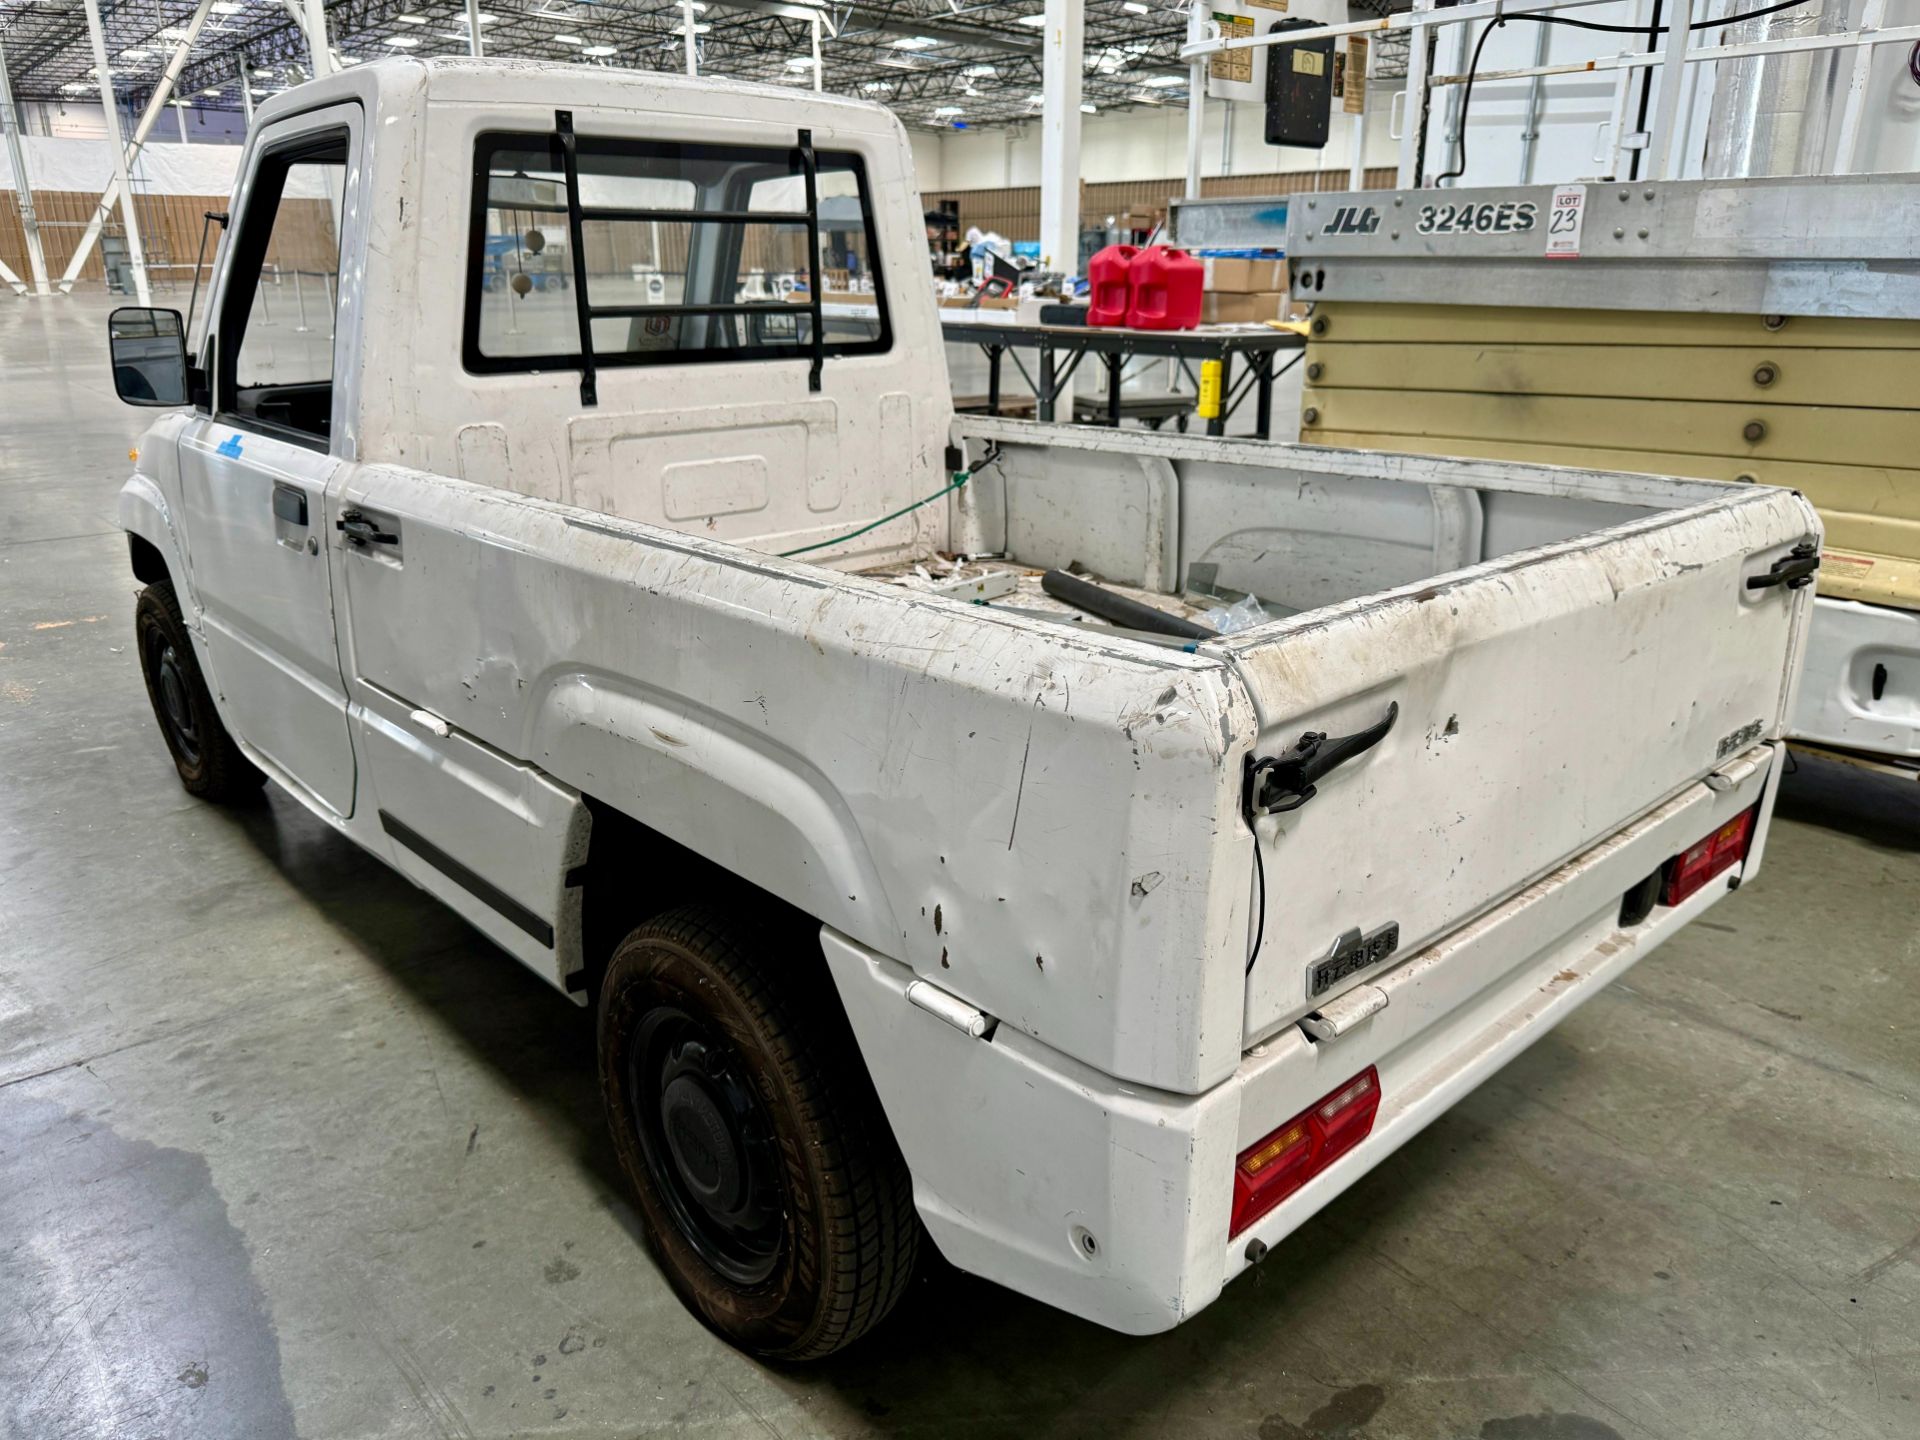 CSG DESIGN ELECTRIC UTILITY VEHICLE, OUT OF SERVICE/MAY NEED BATTERIES - Image 2 of 10